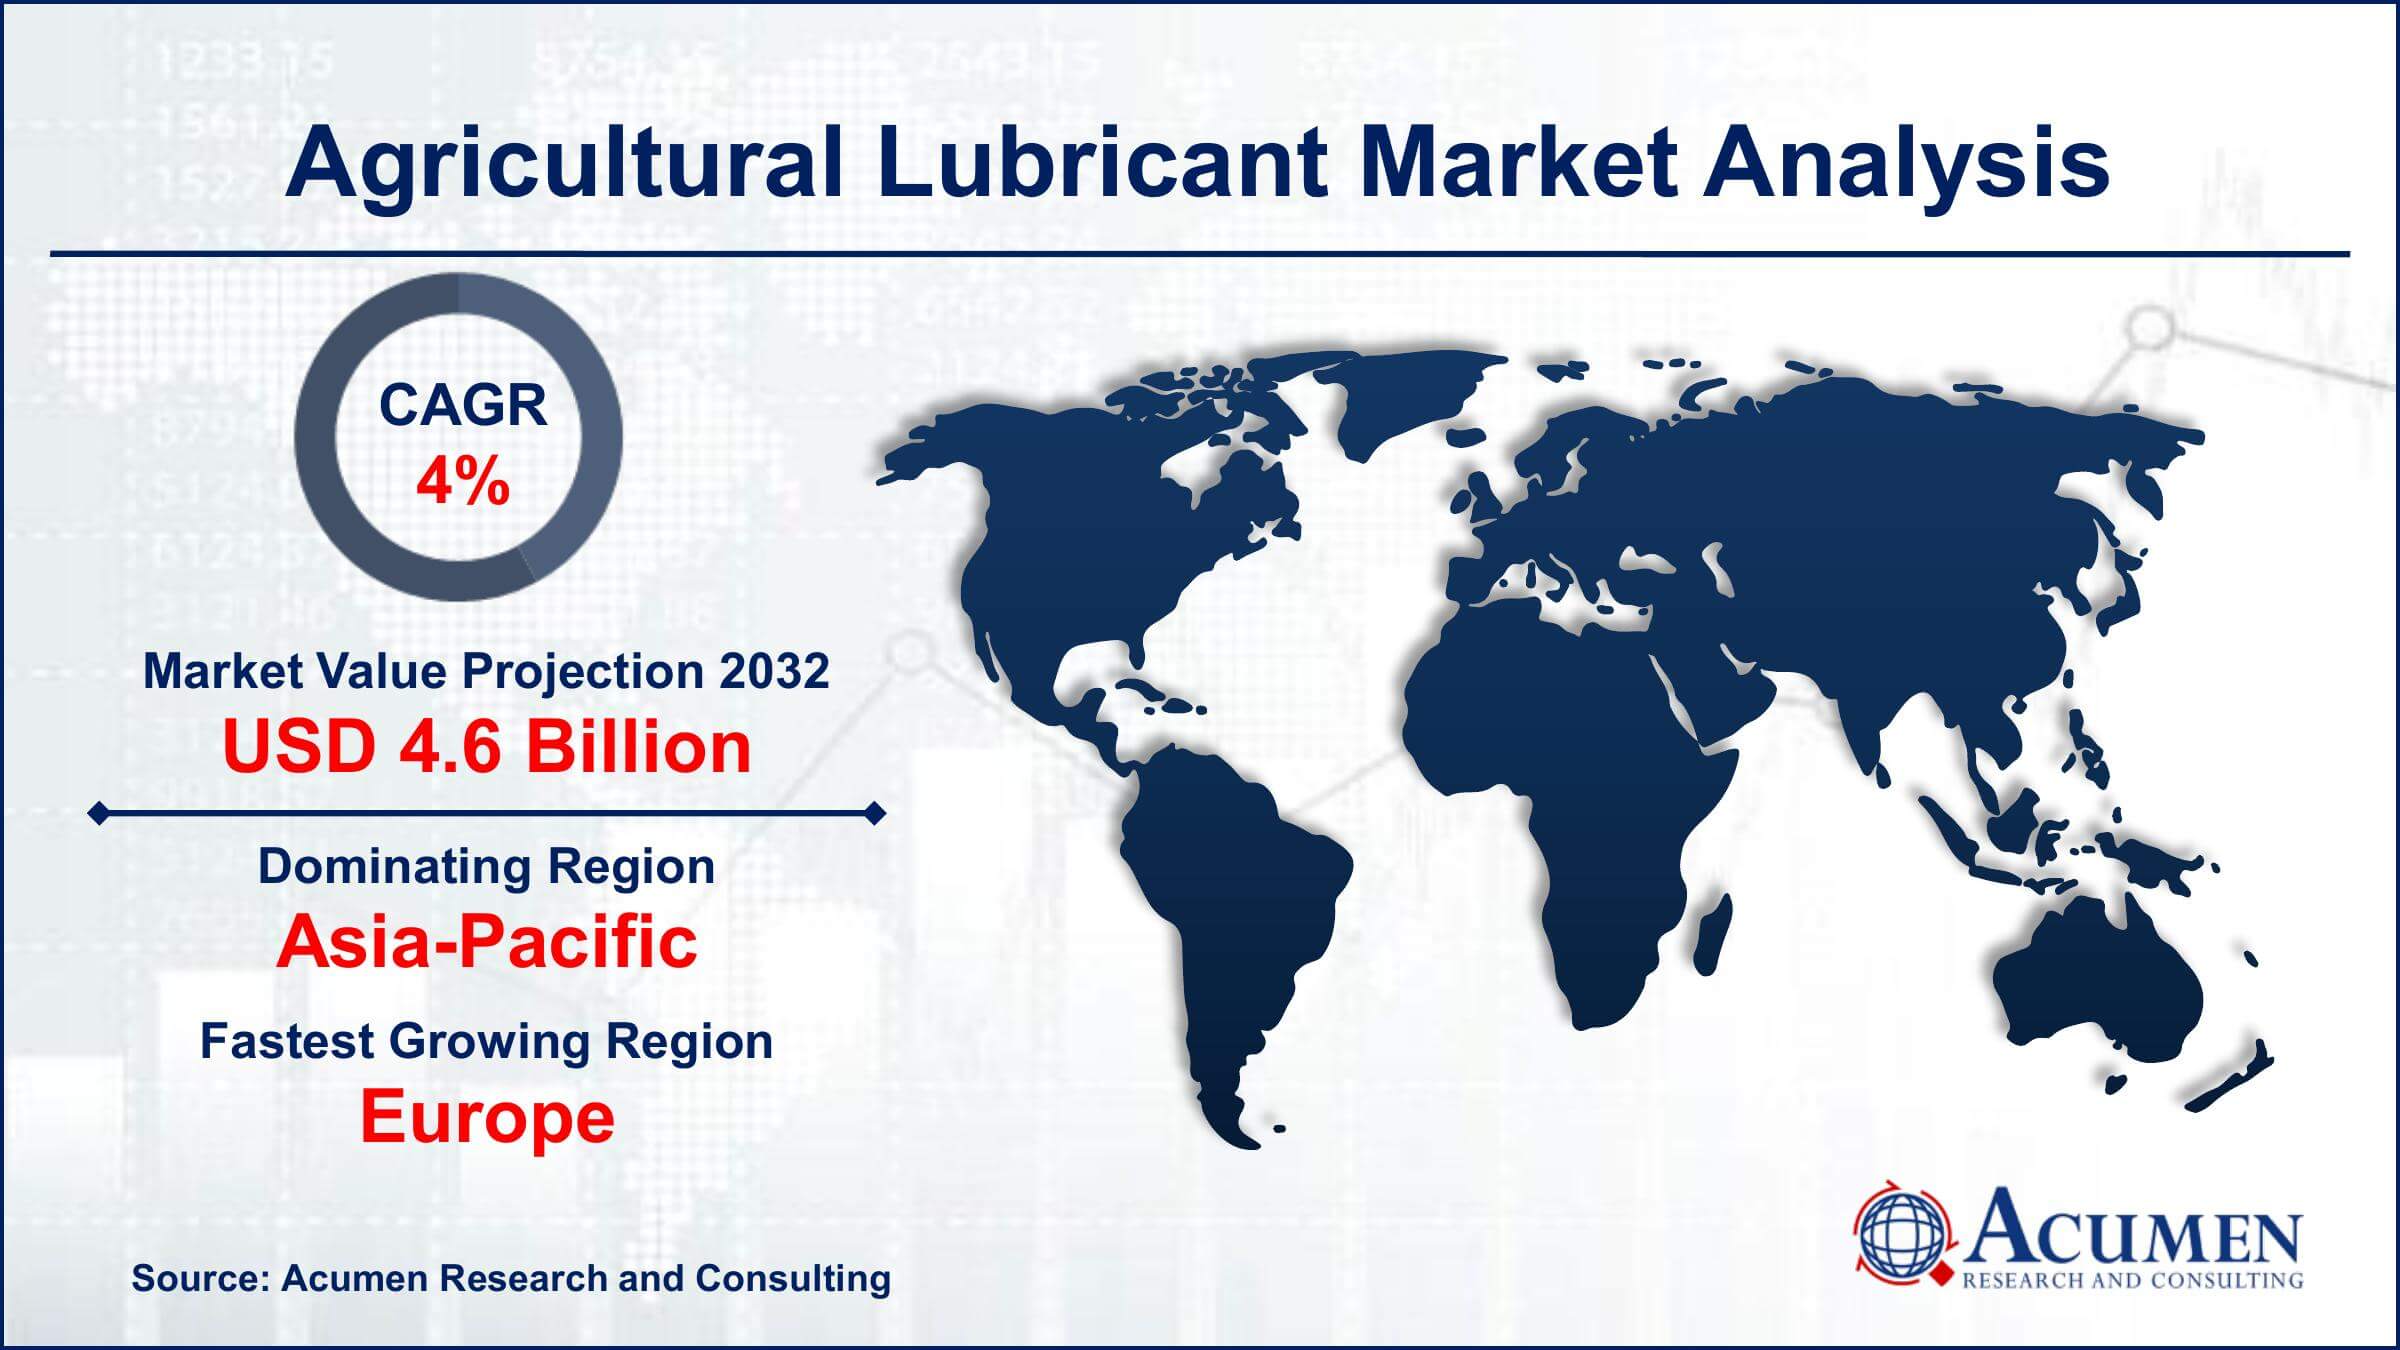 Global Agricultural Lubricant Market Trends